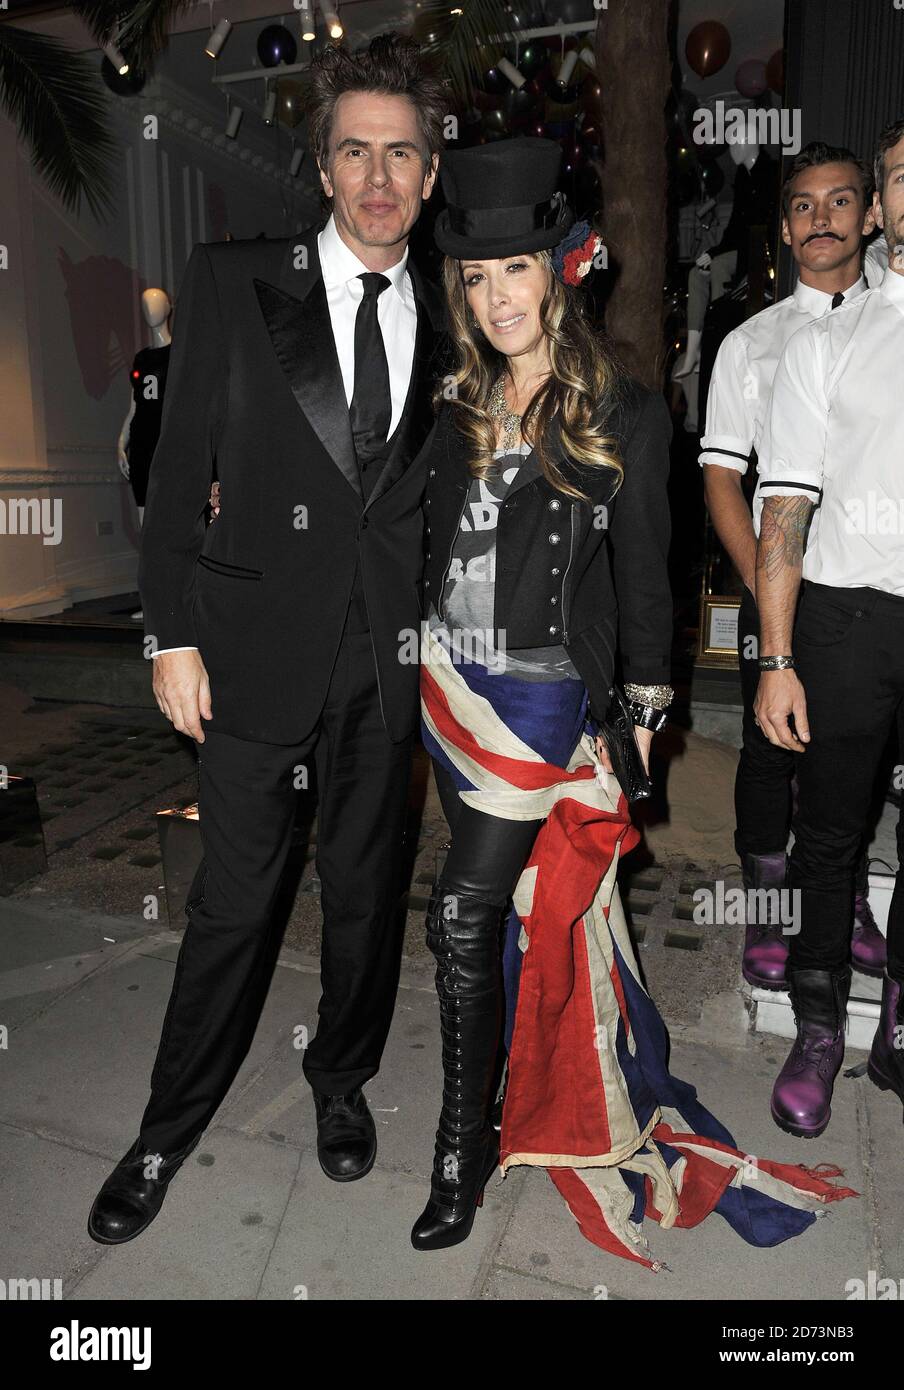 John Taylor and Gela Nash-Taylor attending the launch party for Juicy Couture's flagship store in central London. Stock Photo